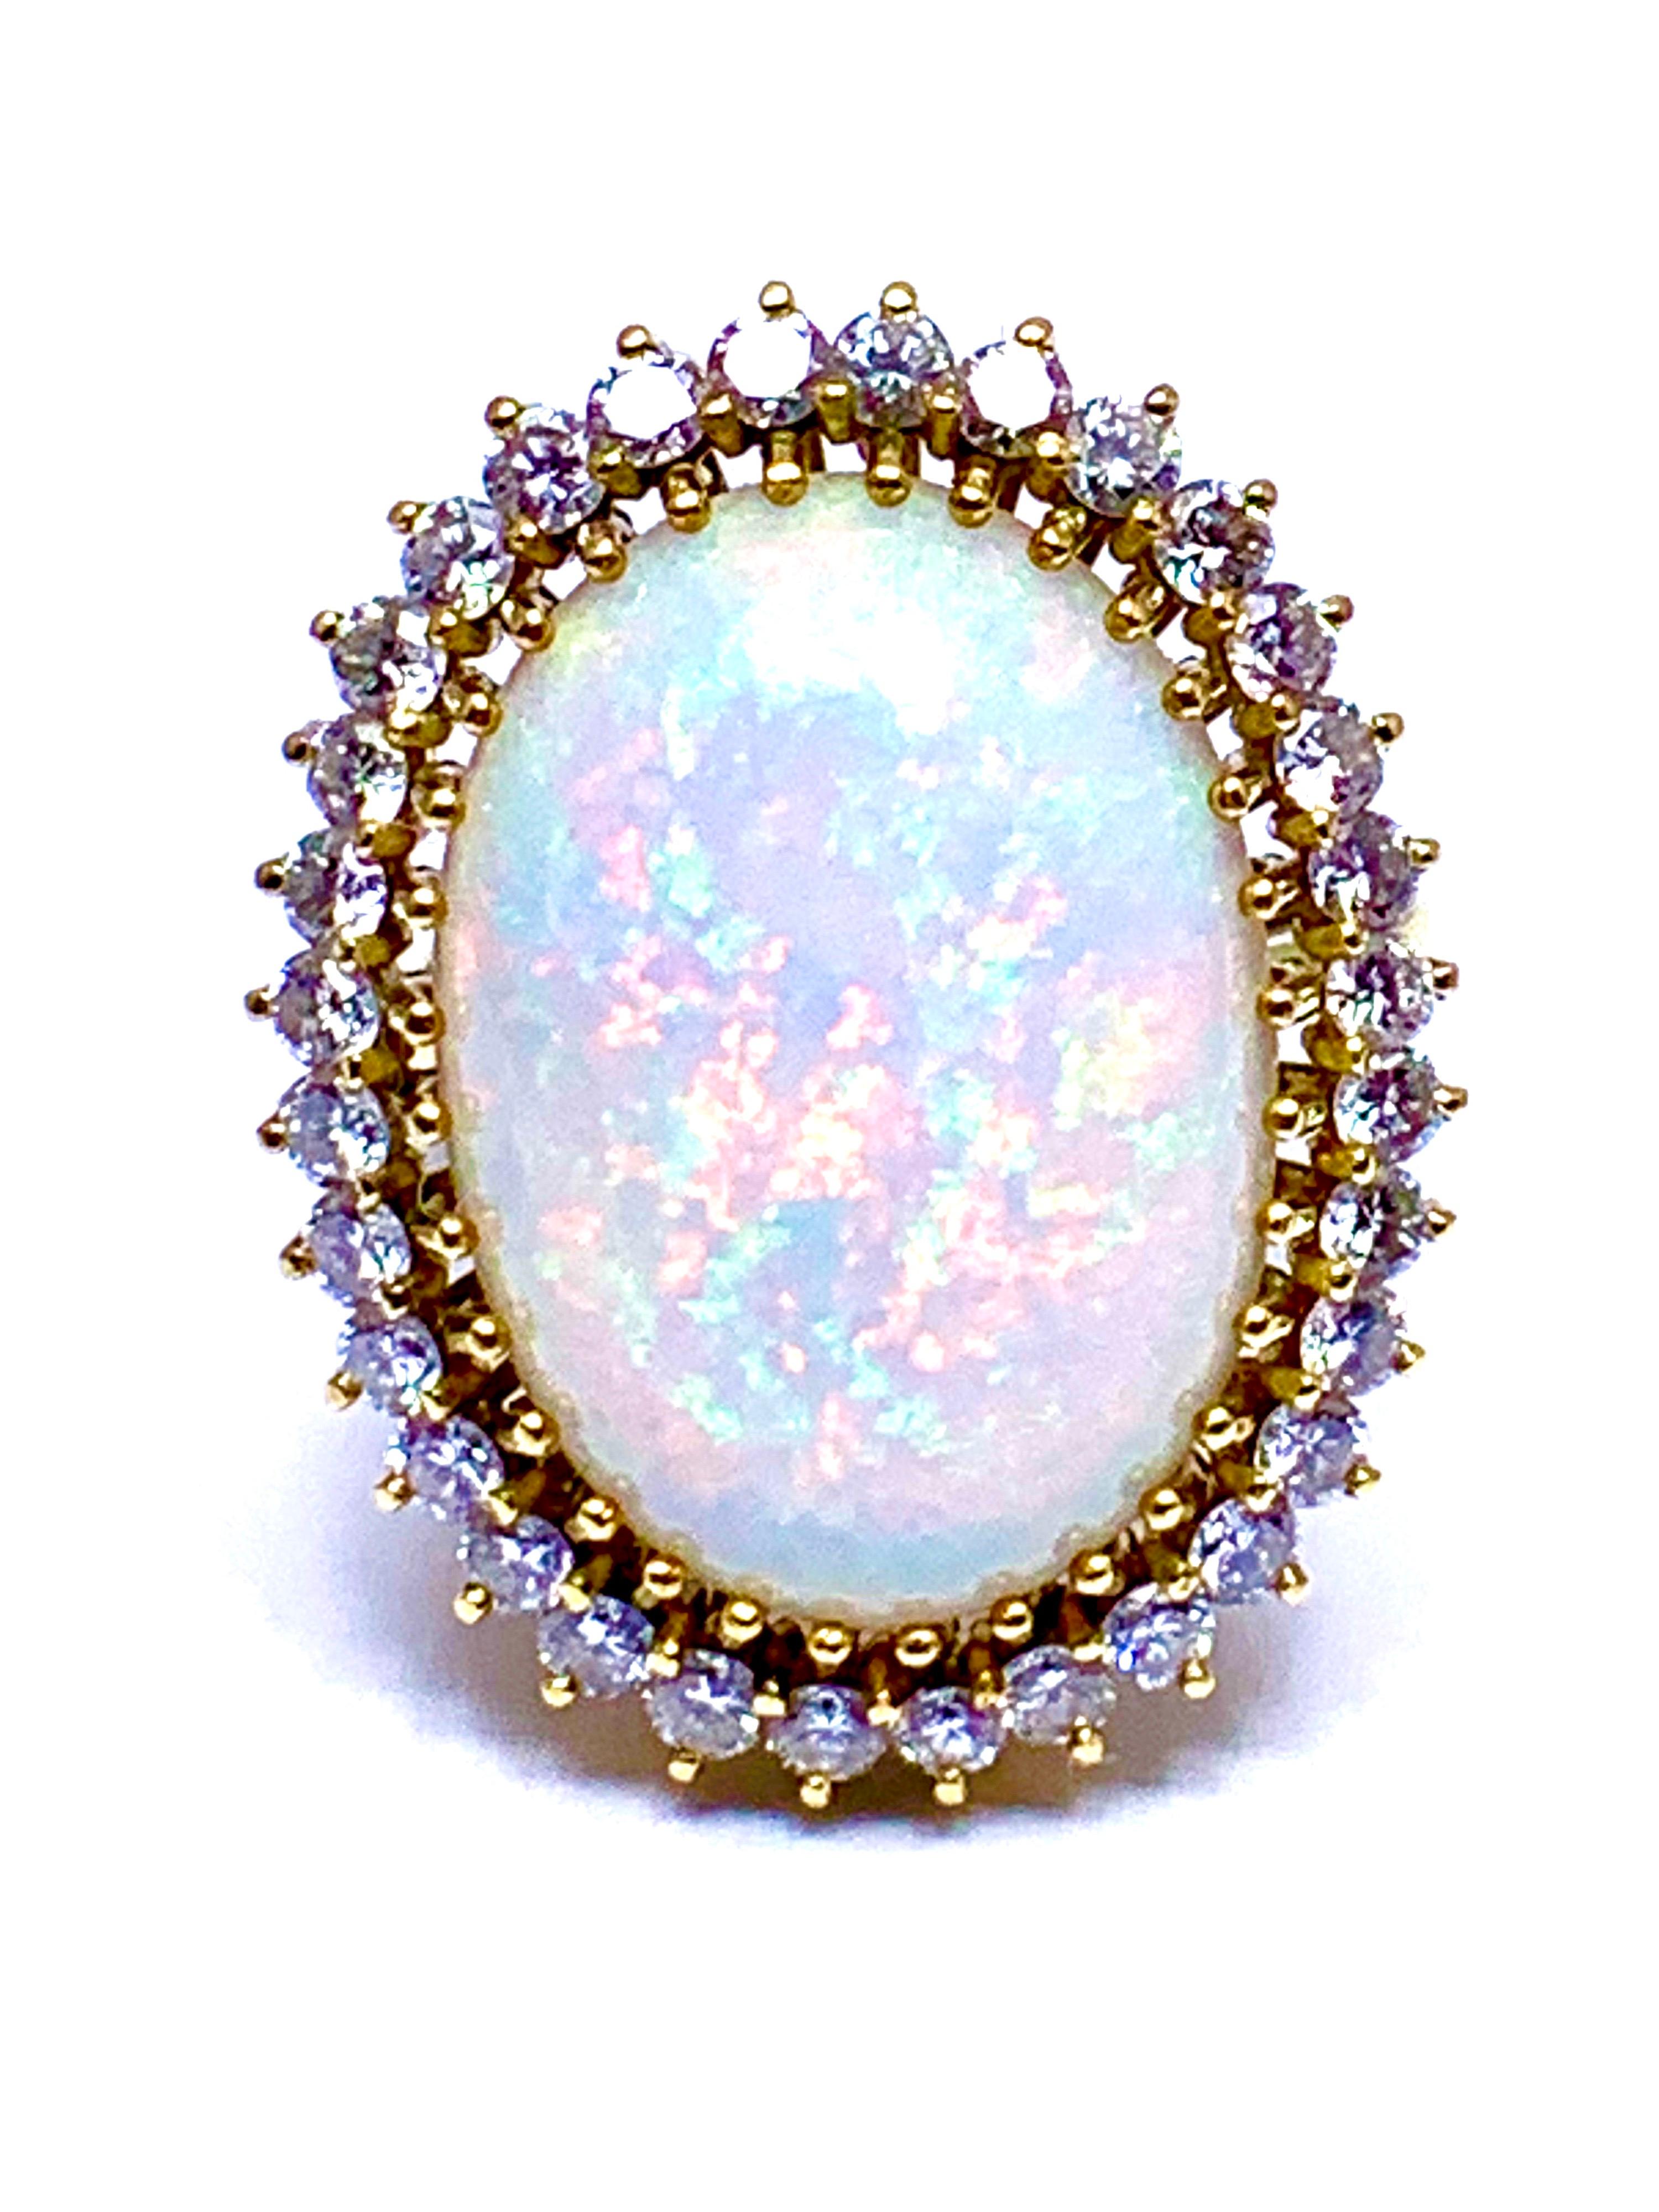 Oval Cut 6.16 Carat Oval Cabochon Opal and Diamond 18 Karat Cocktail Ring